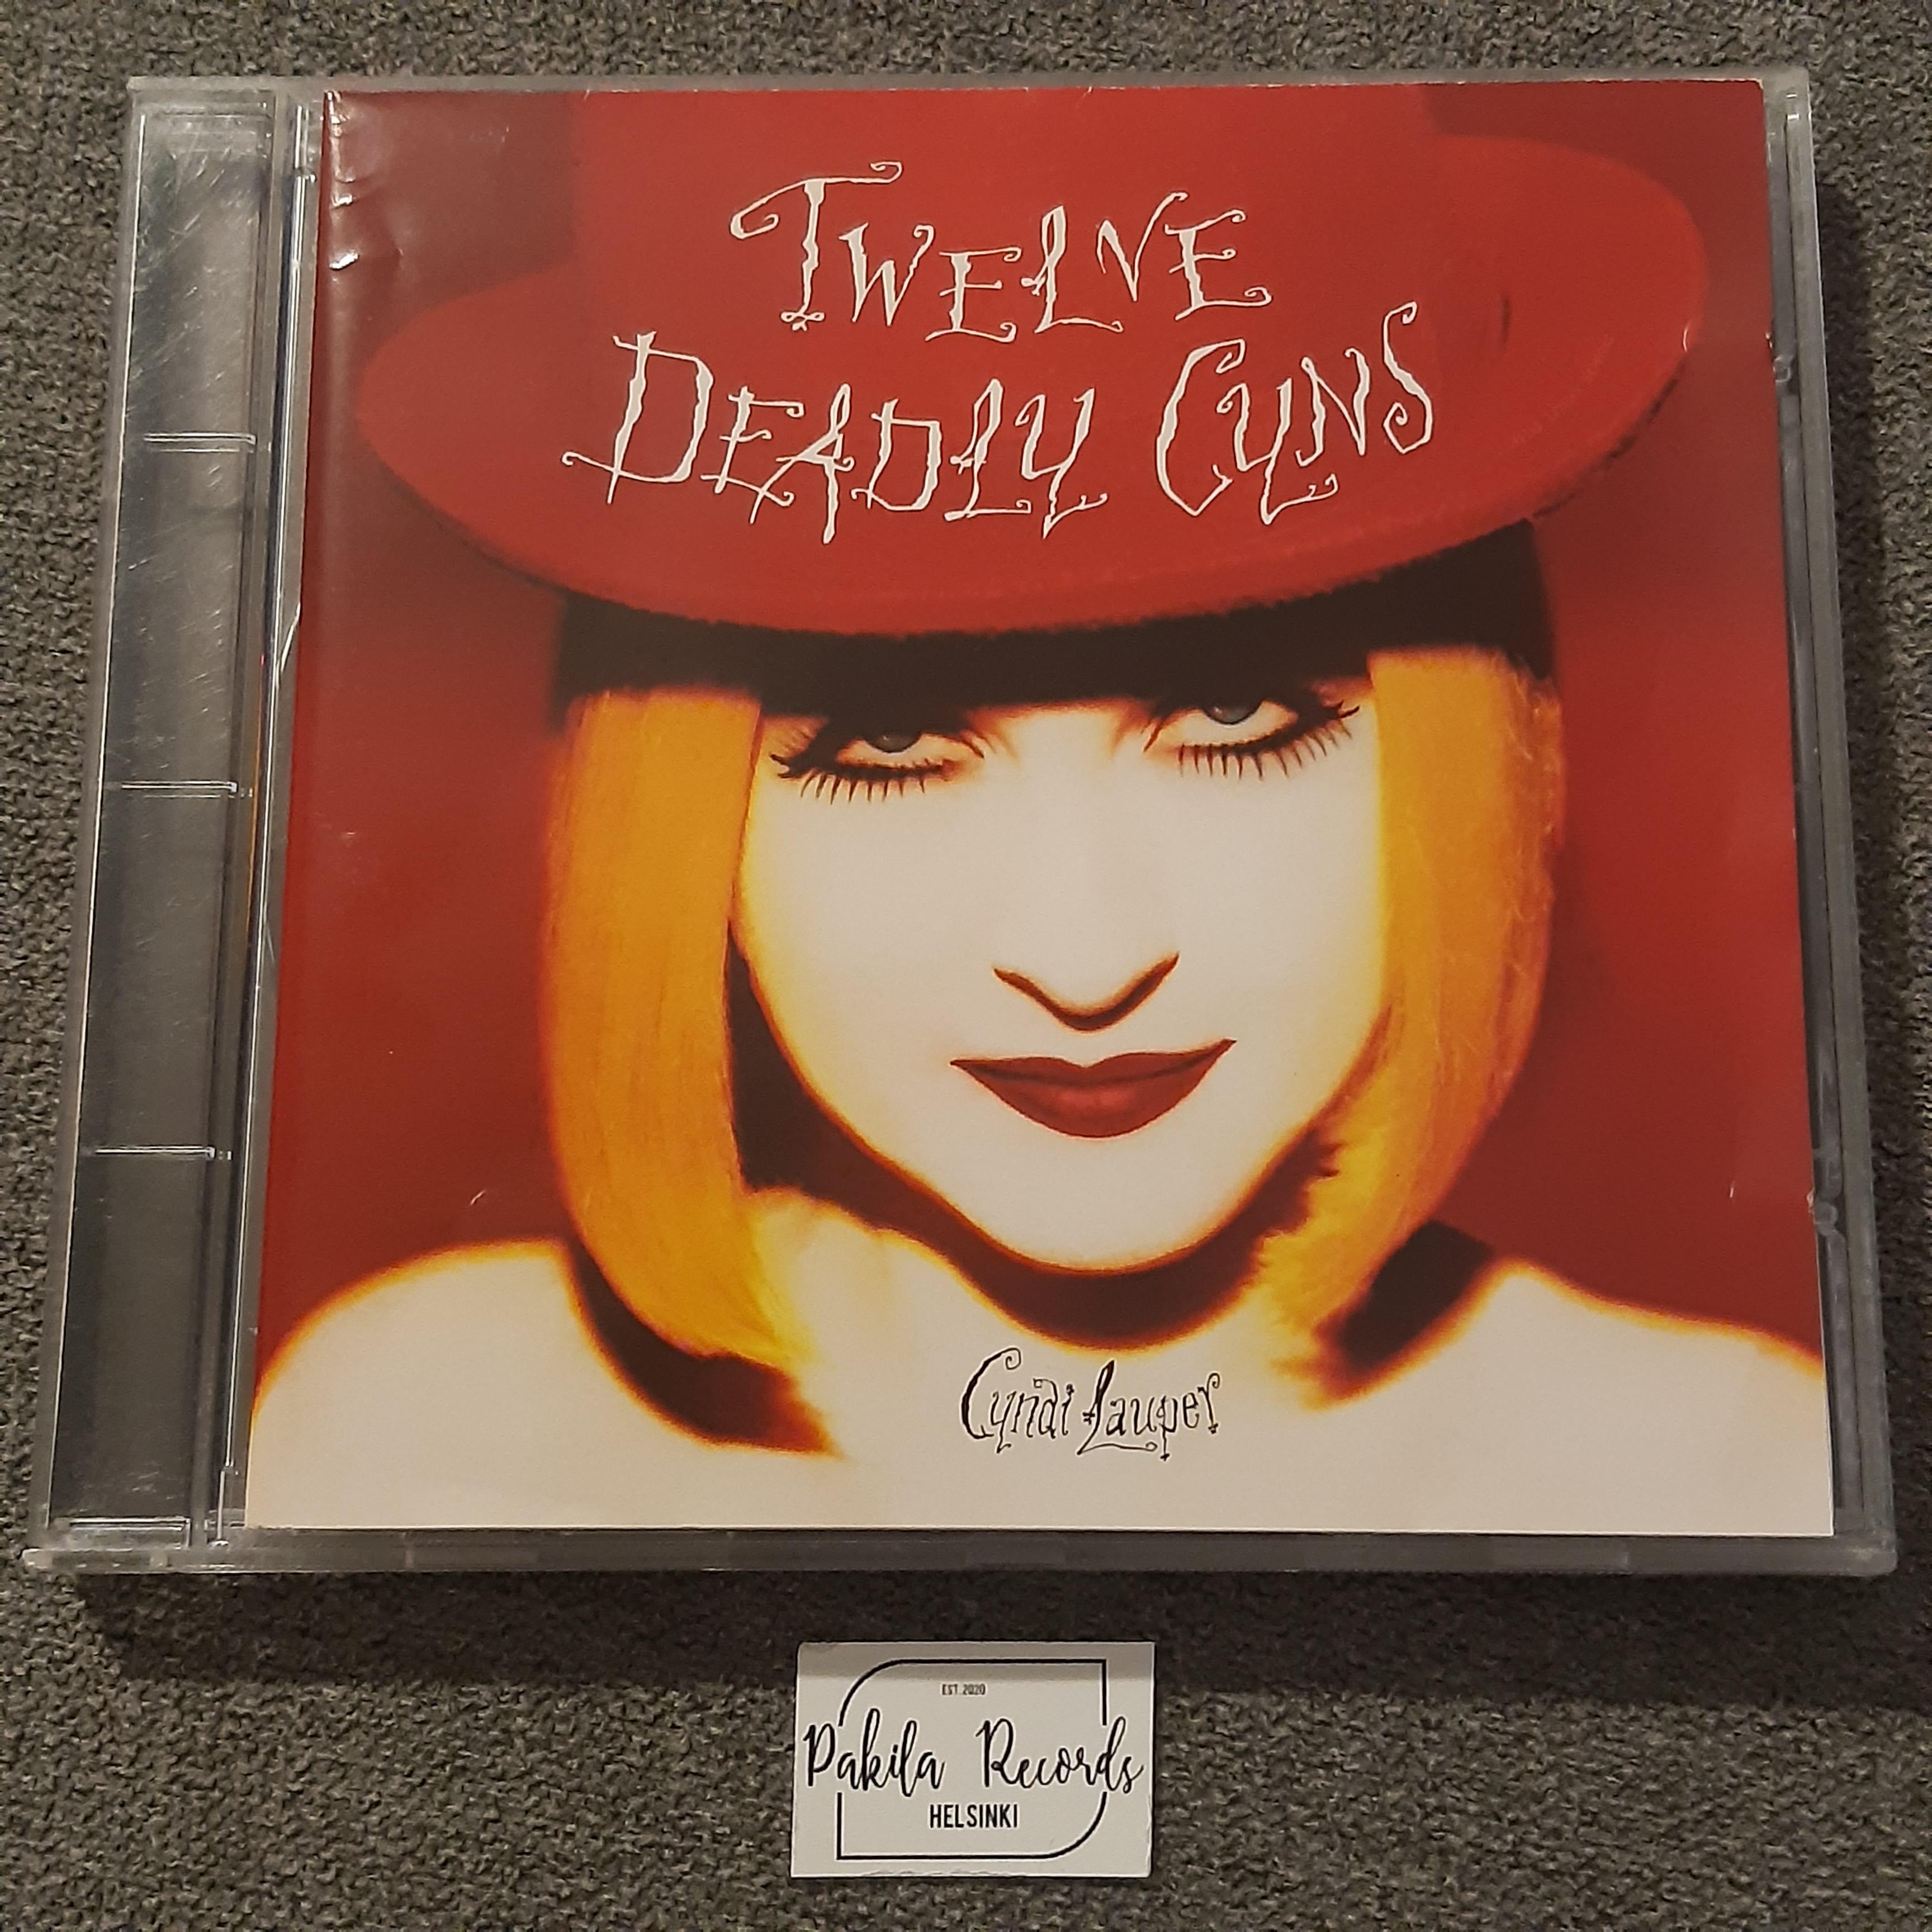 Cyndi Lauper - Twelve Deadly Cyns... And Then Some - CD (käytetty)